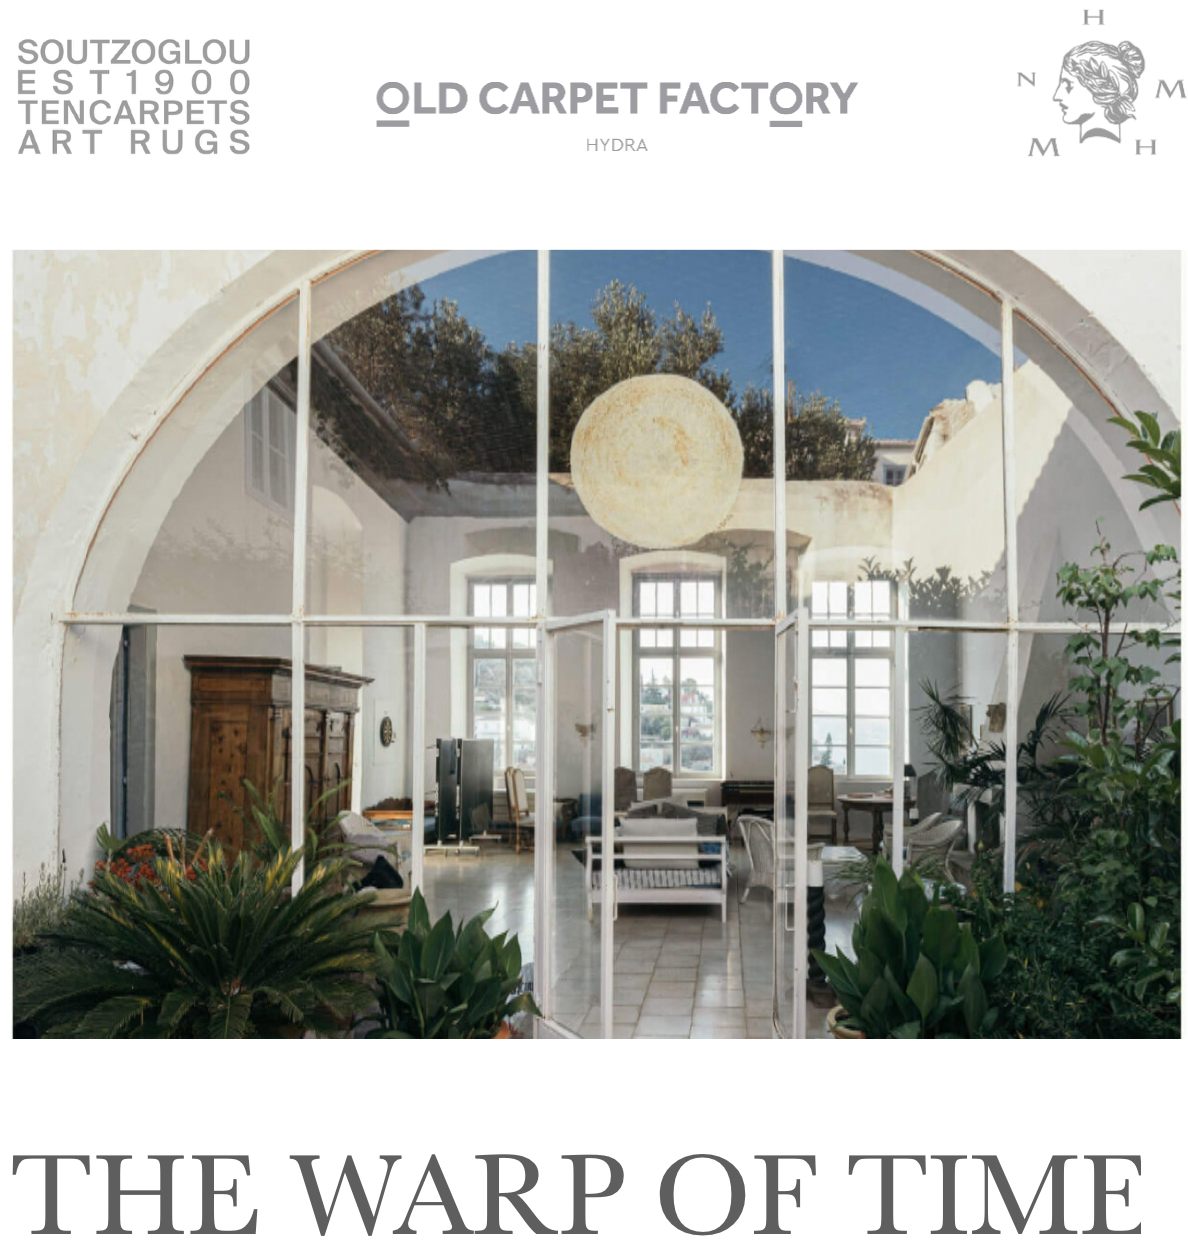 Exhibition at the Old Carpet Factory on Hydra Island Greece, 16 June - 8 Sept 2024 with Helen Mardas, Dimitrios Antonitsis and Soutzoglou carpets and rugs.